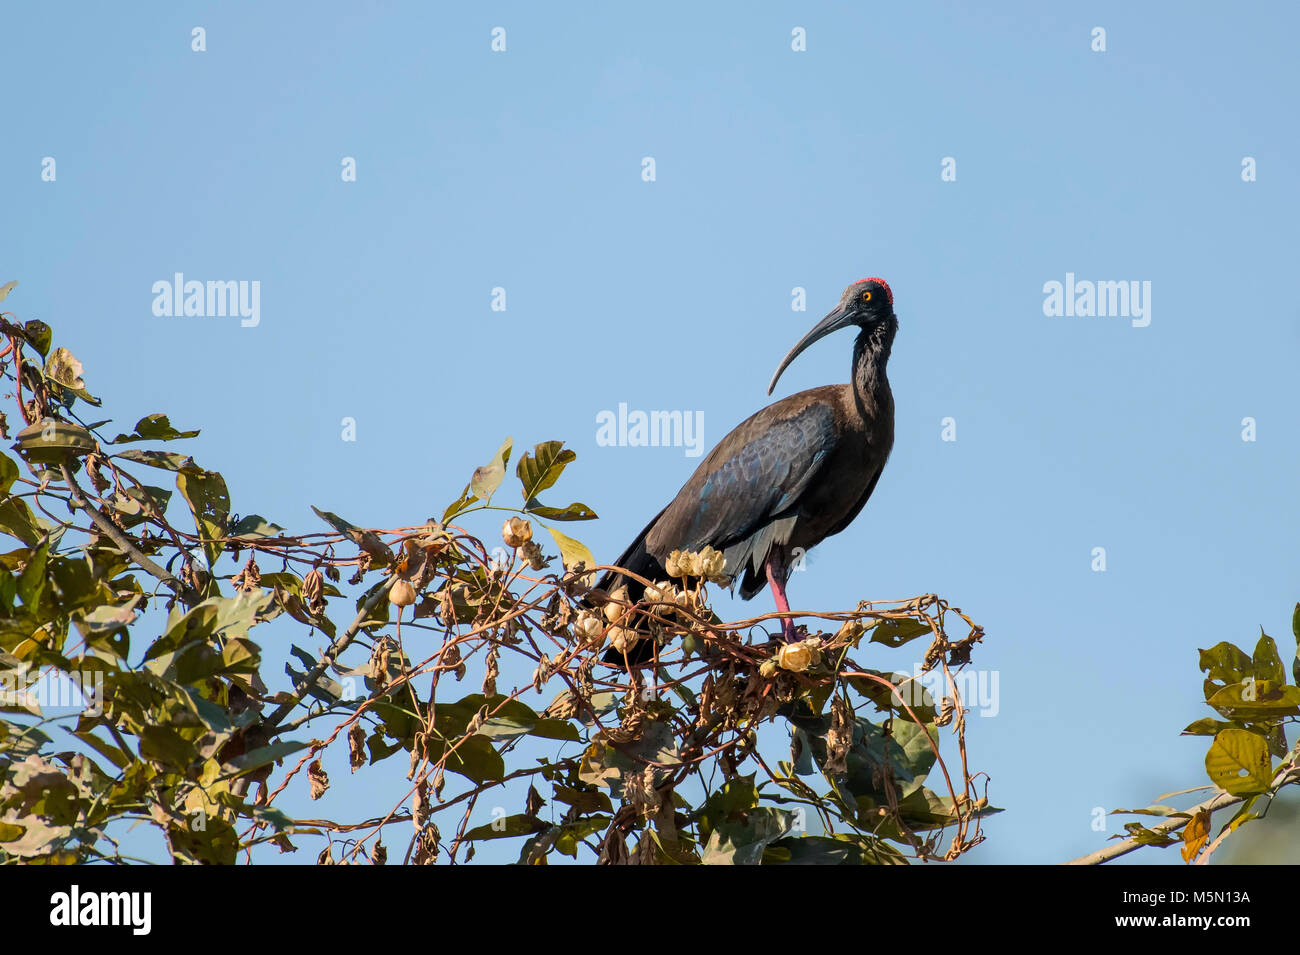 white patch, Red naped Ibis, Ibis, Black Ibis, White shouldered Ibis, crimson ,red ,warty, skin, crown, nape, long down curved bill, long ,down curved Stock Photo